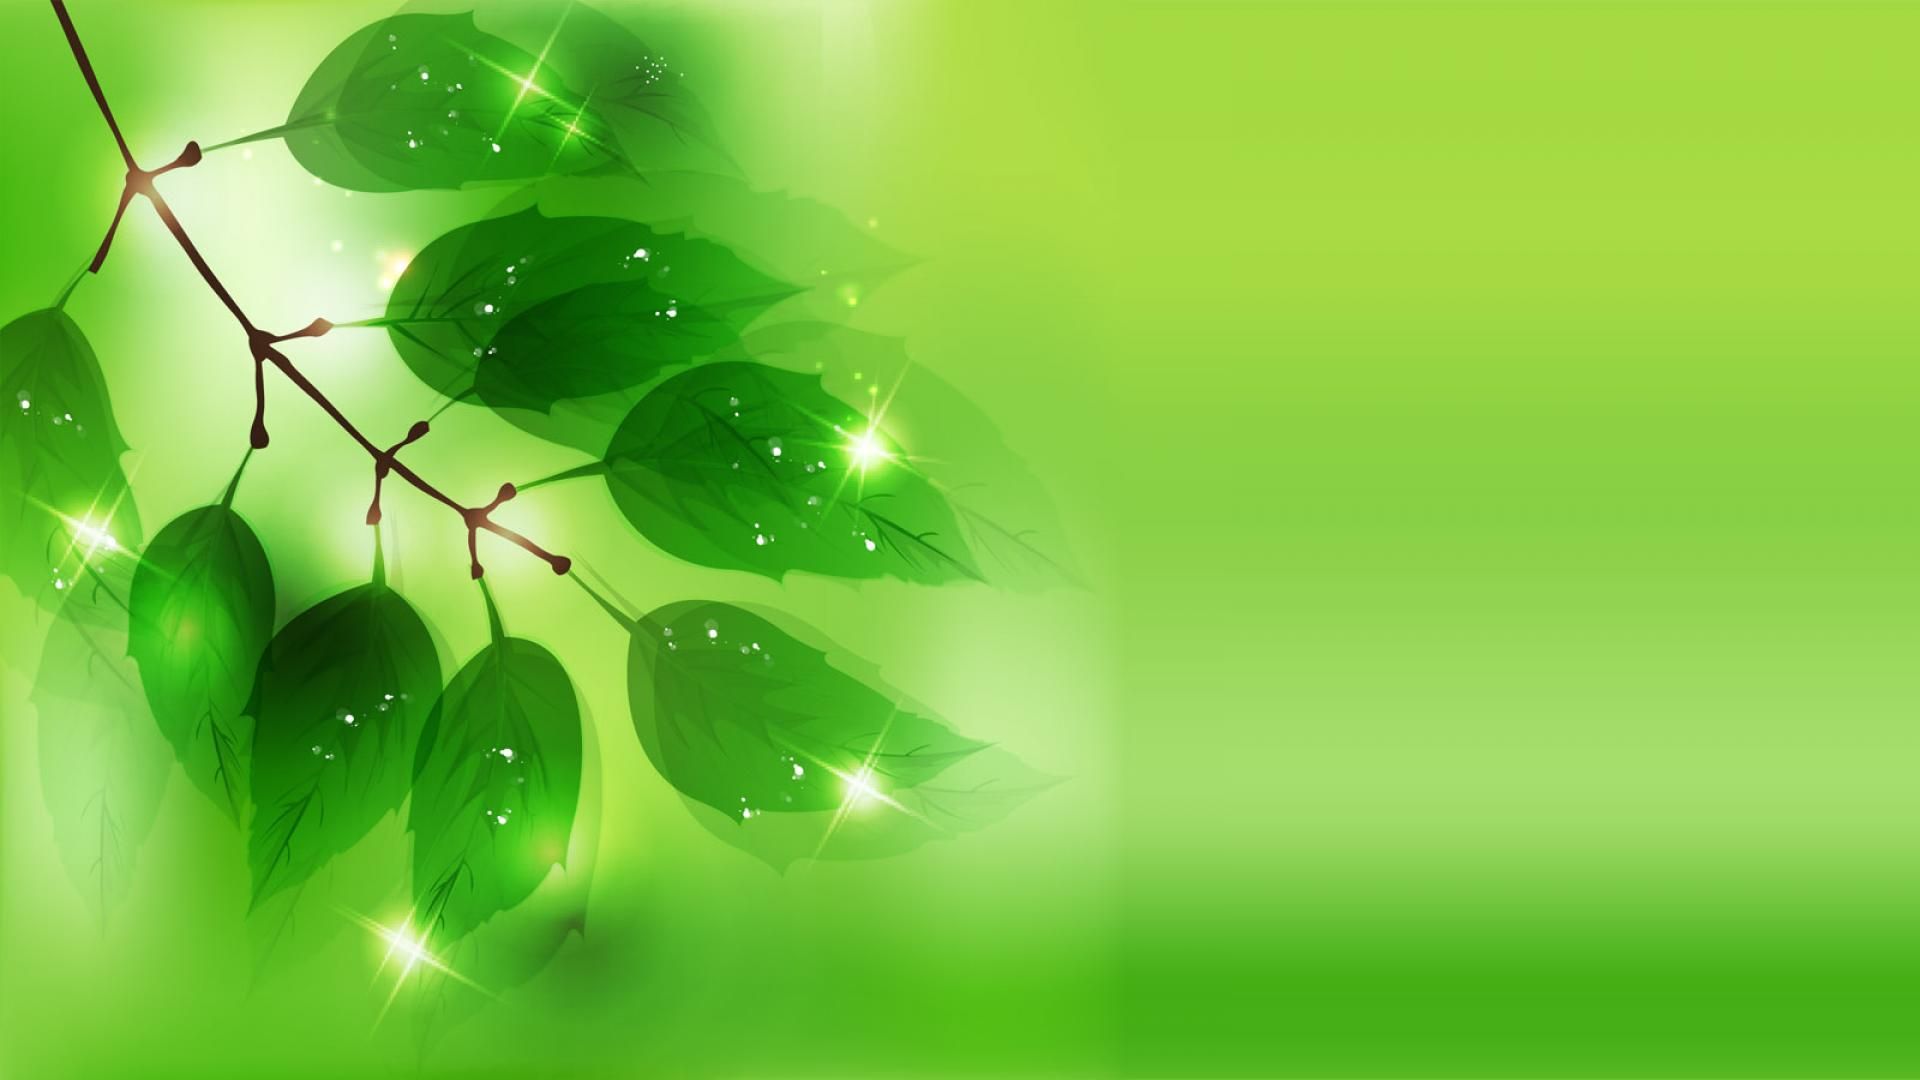 Green hd wallpapers download free